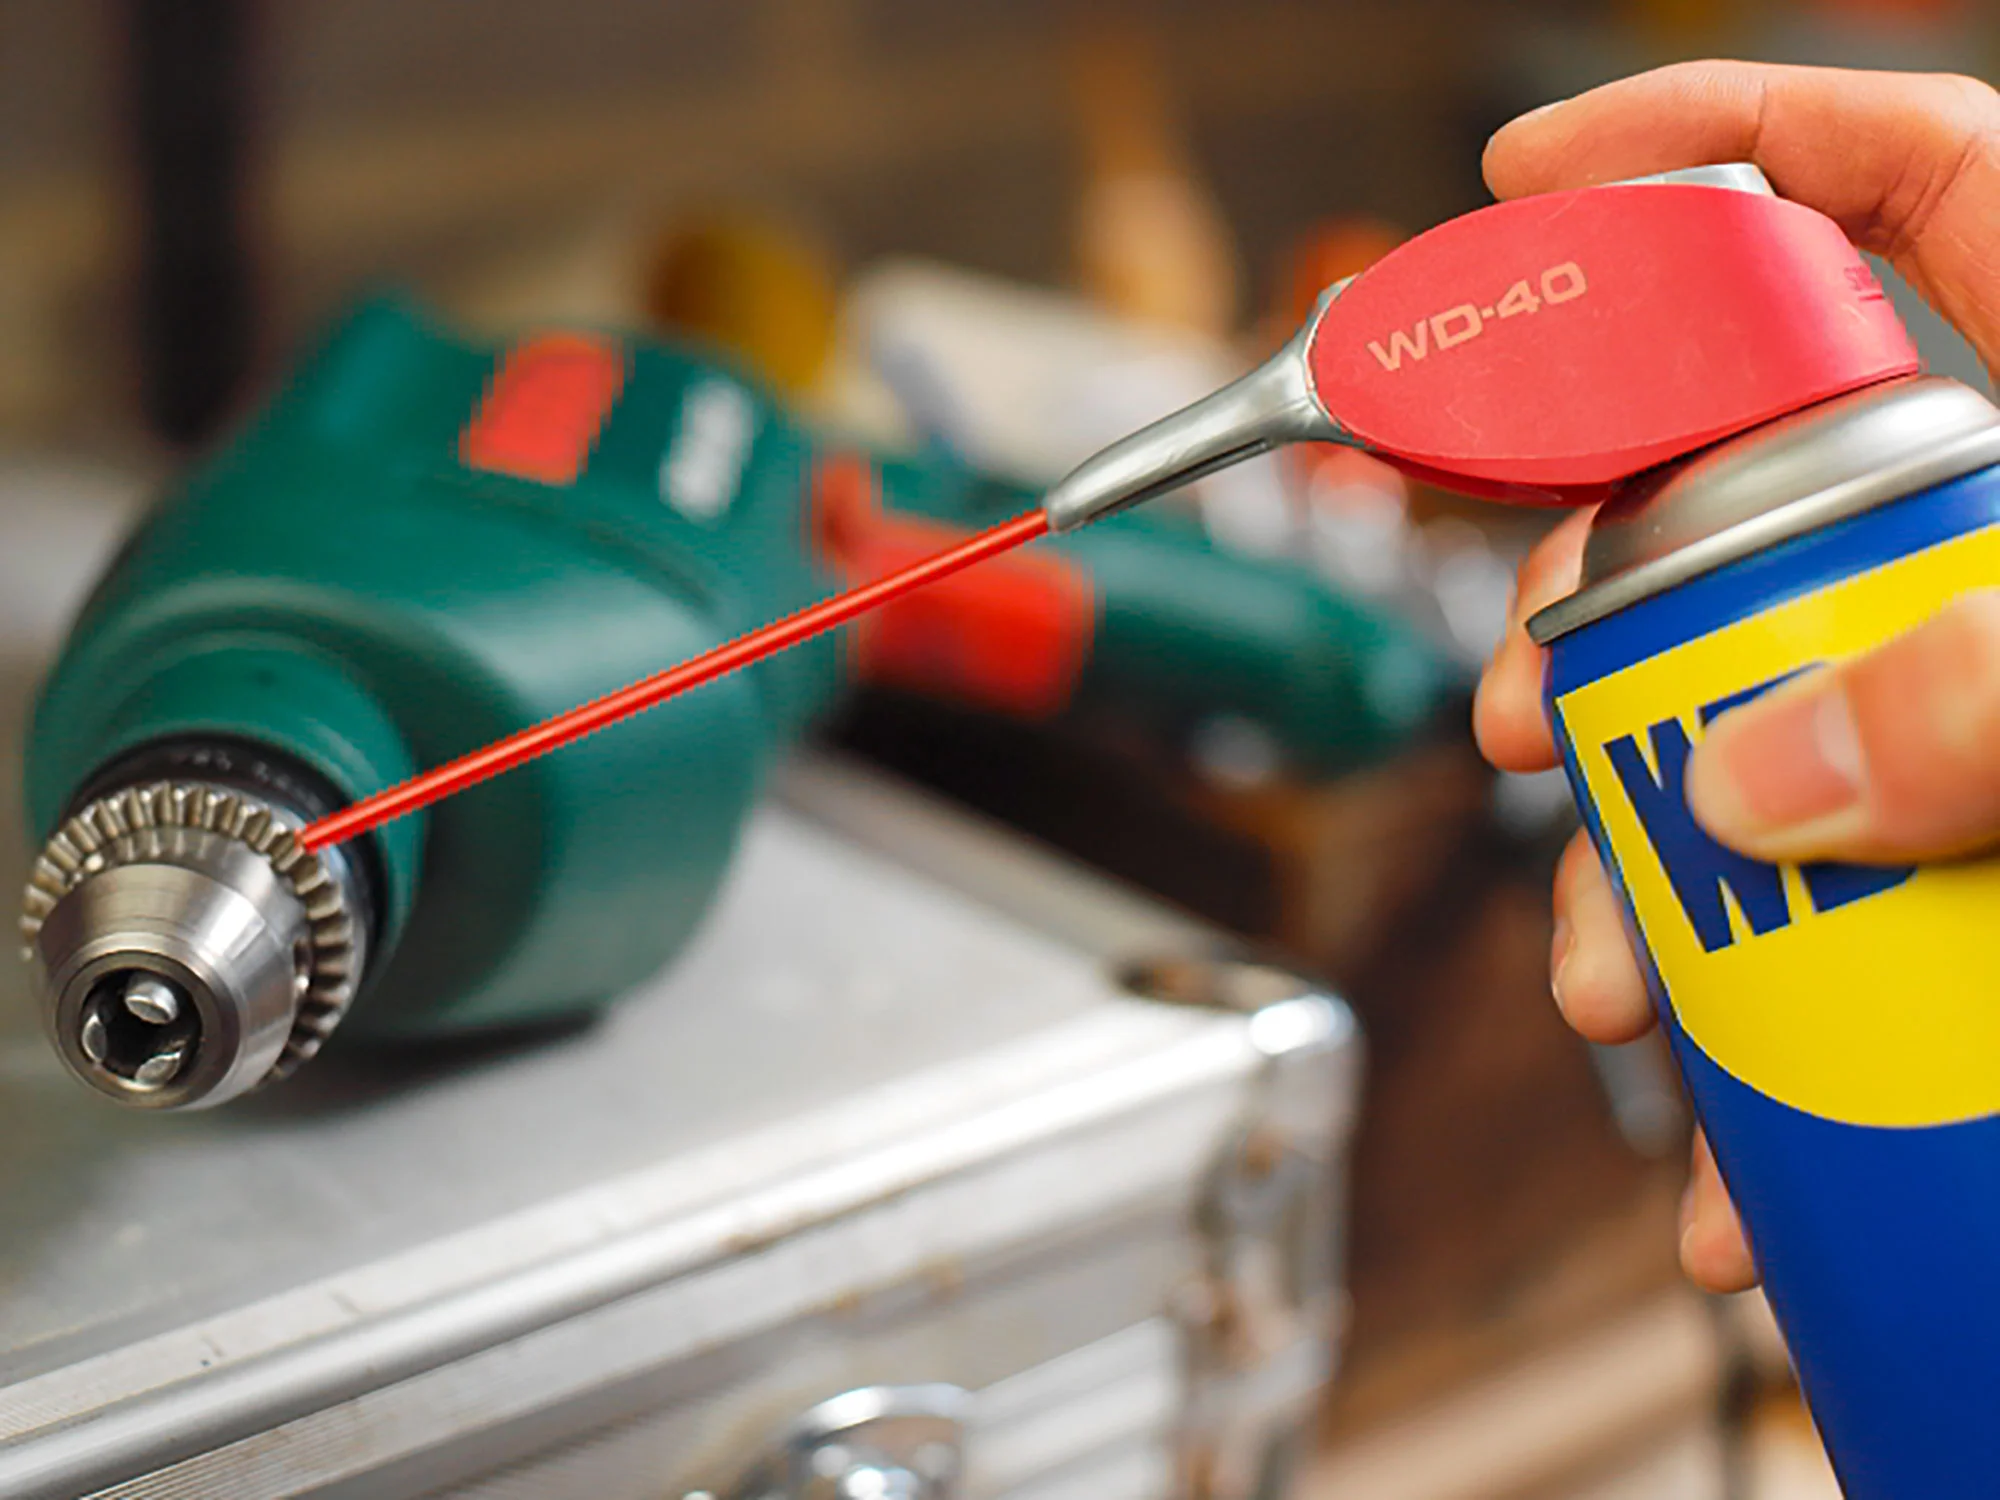 WD-40 MULTIFUNKTIONS-